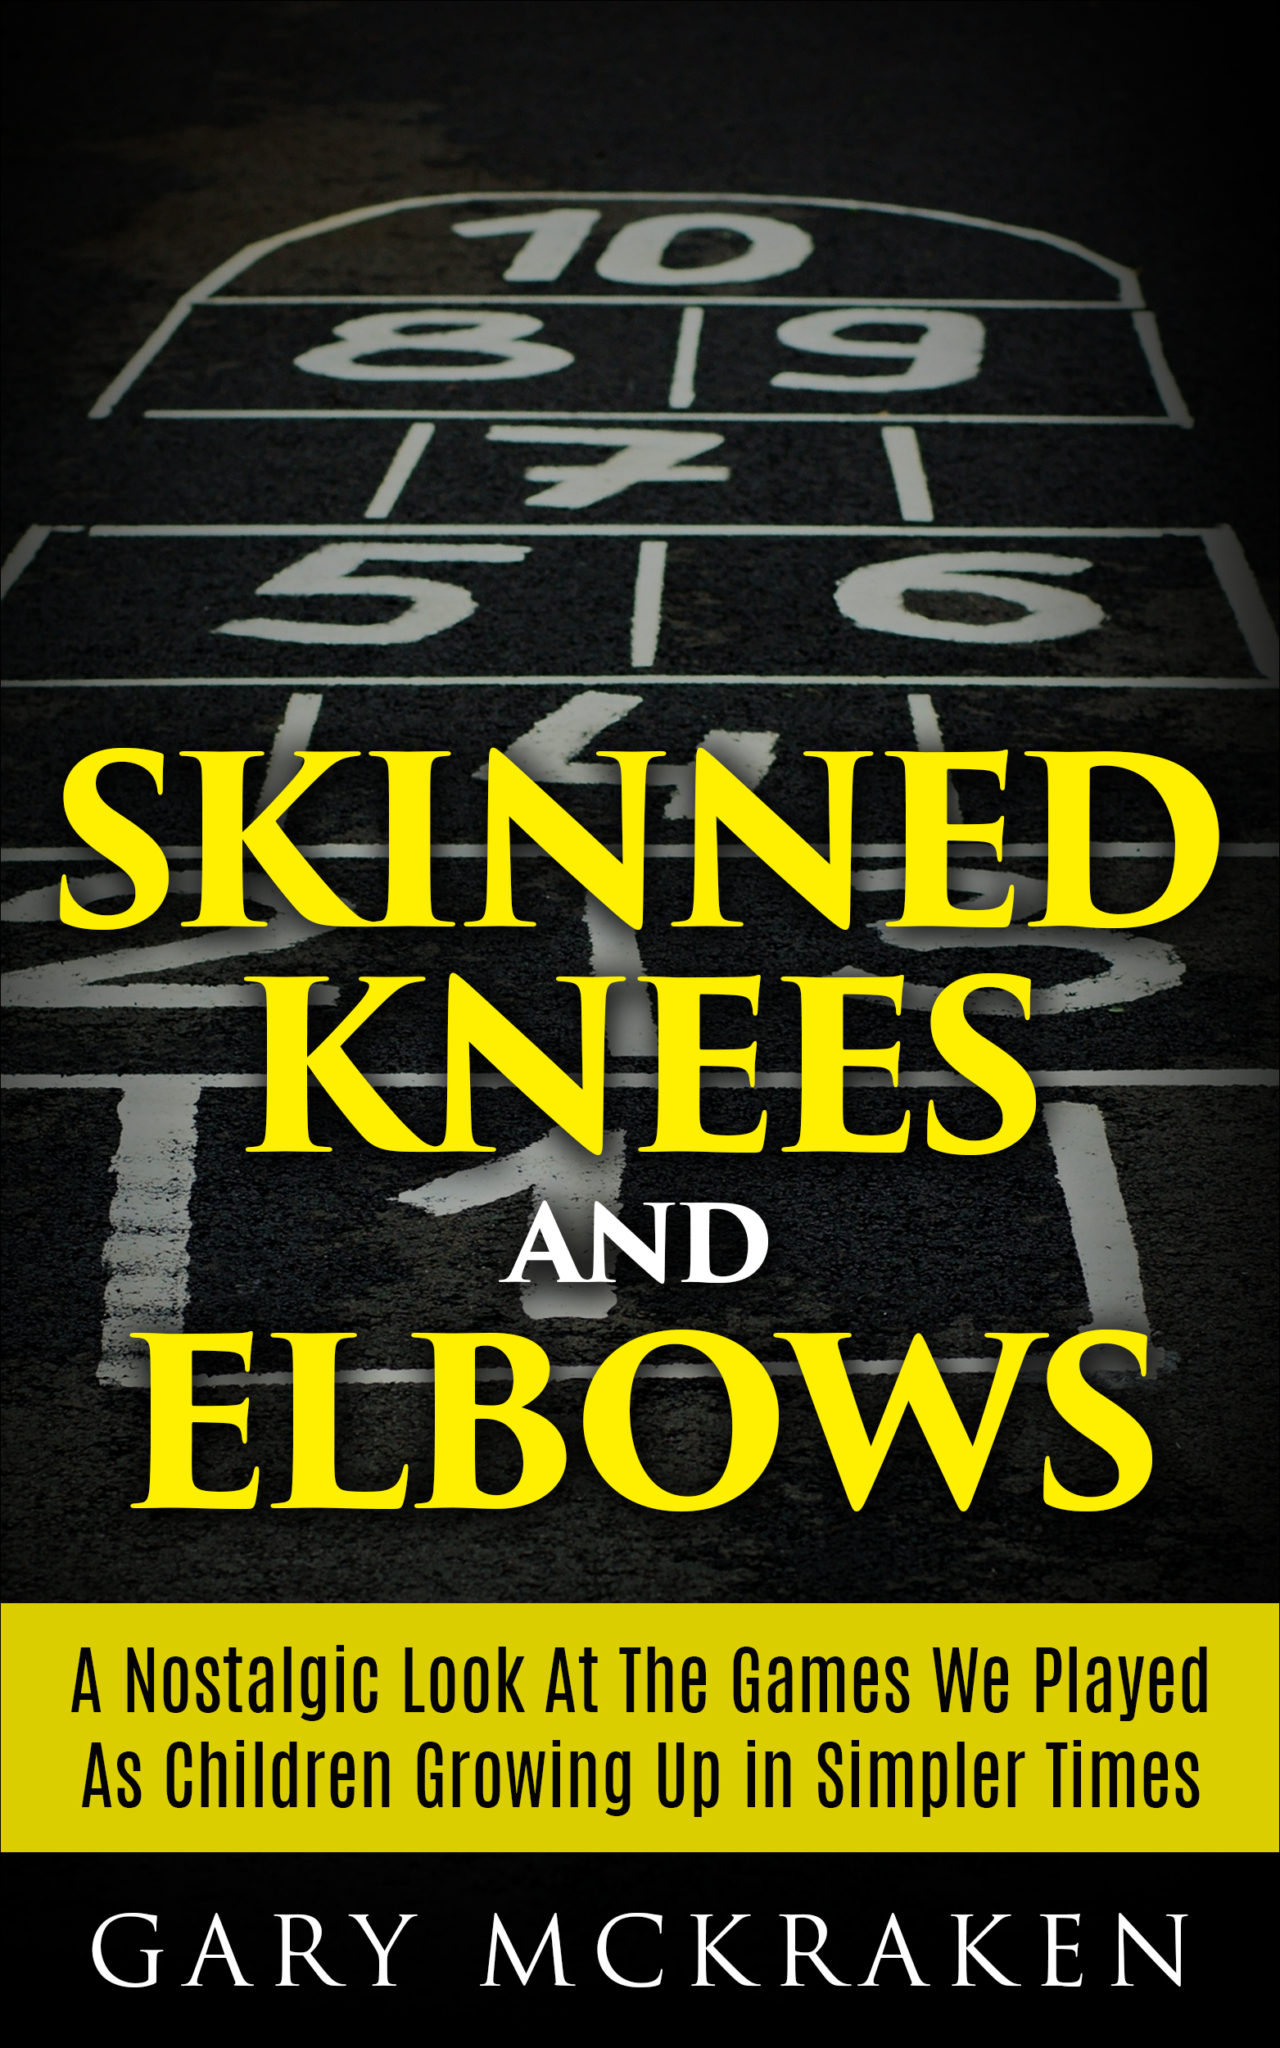 FREE: Skinned Knees and Elbows: A Nostalgic Look at the Games We Played as Children Growing Up in Simpler Times by Gary McKraken